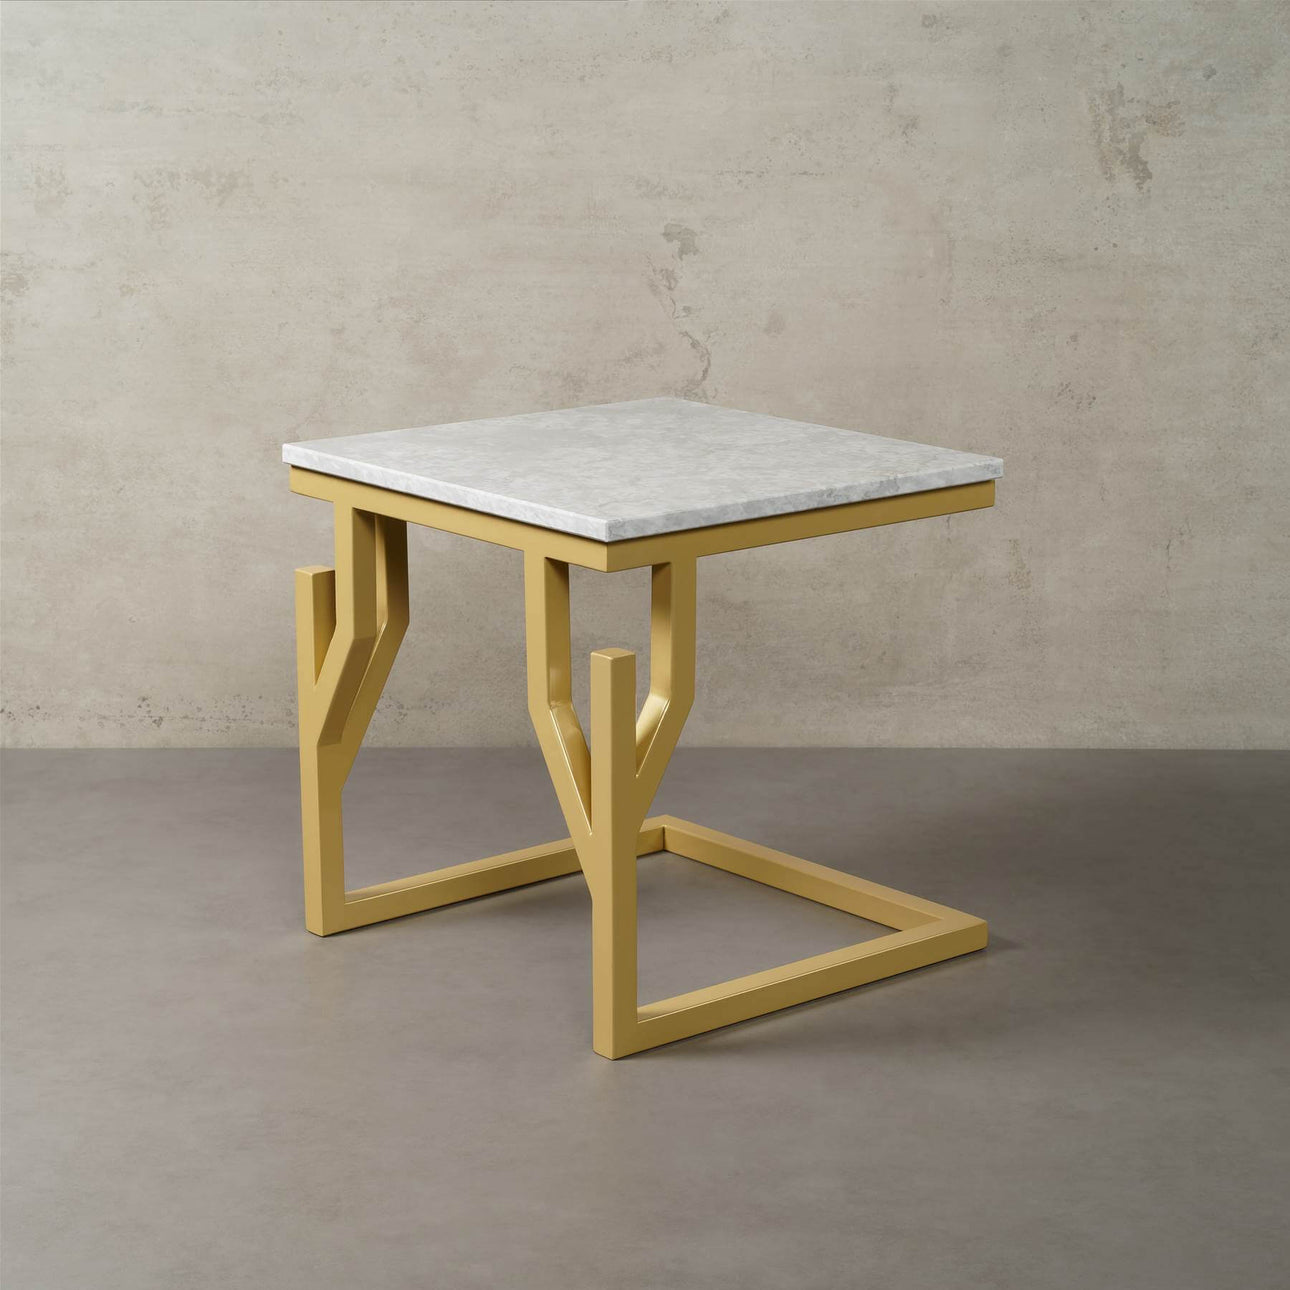 Coral Bay marble side table